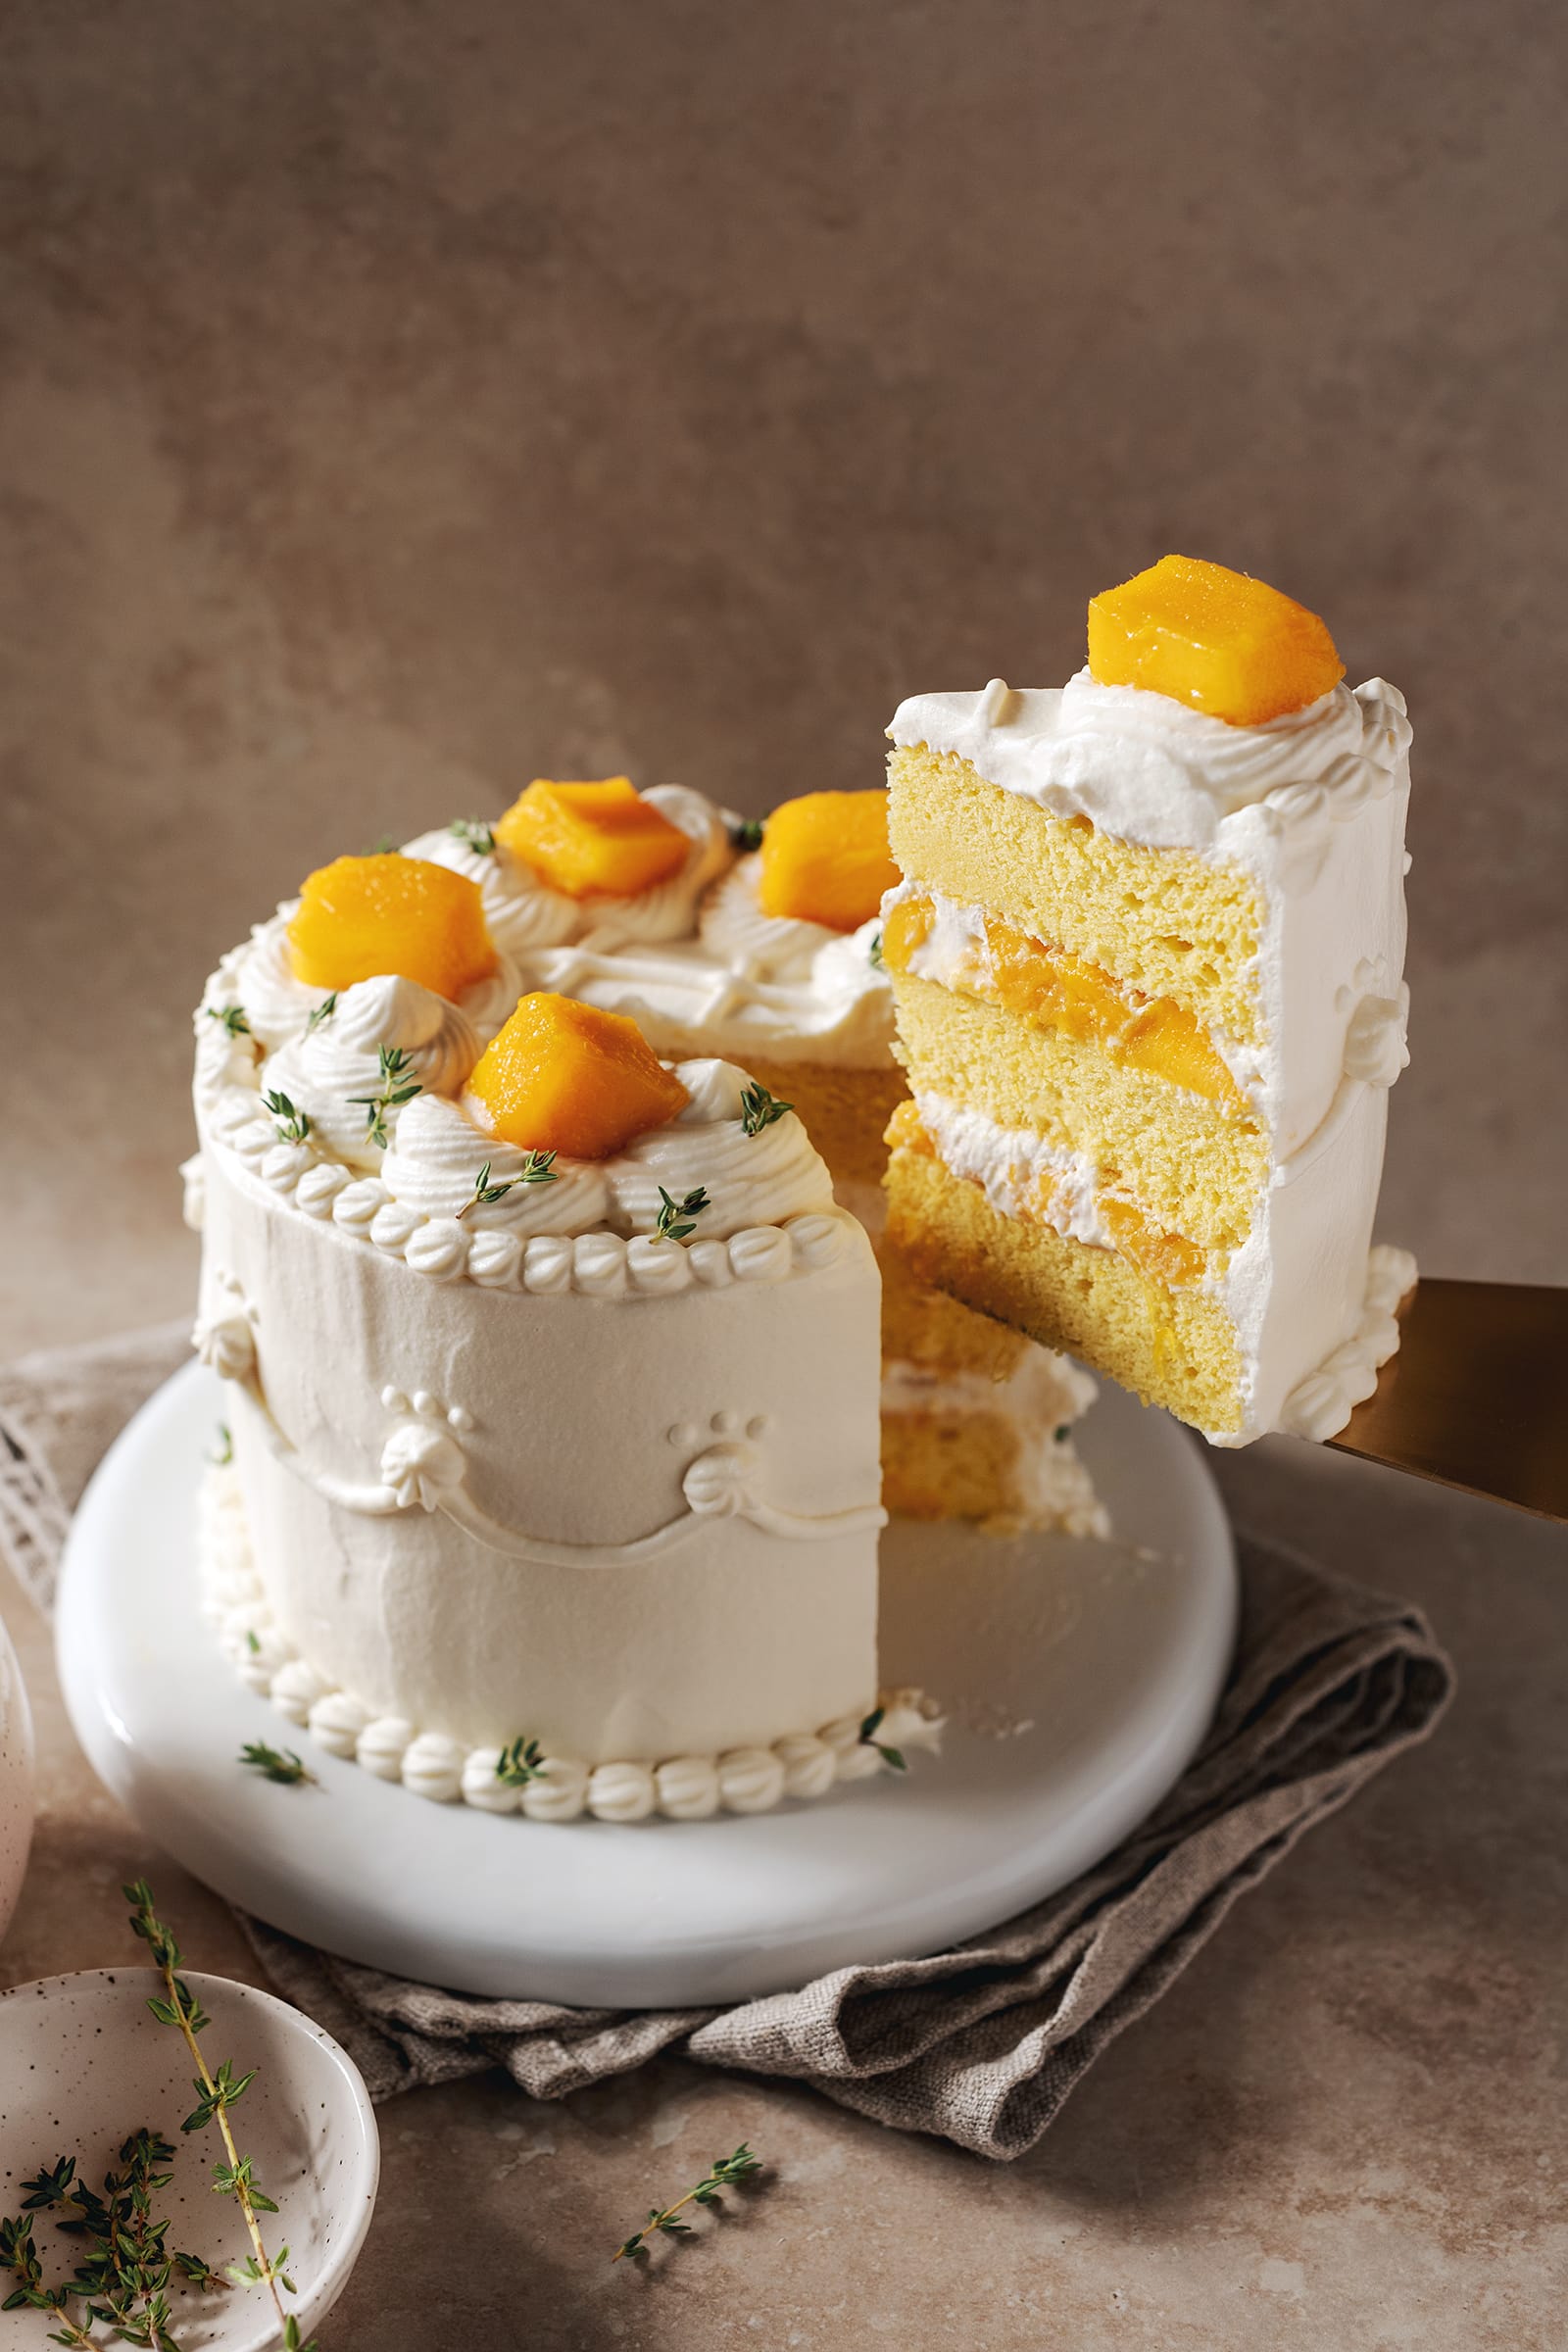 A slice of mango chiffon cake lifted from the cake with a cake server.